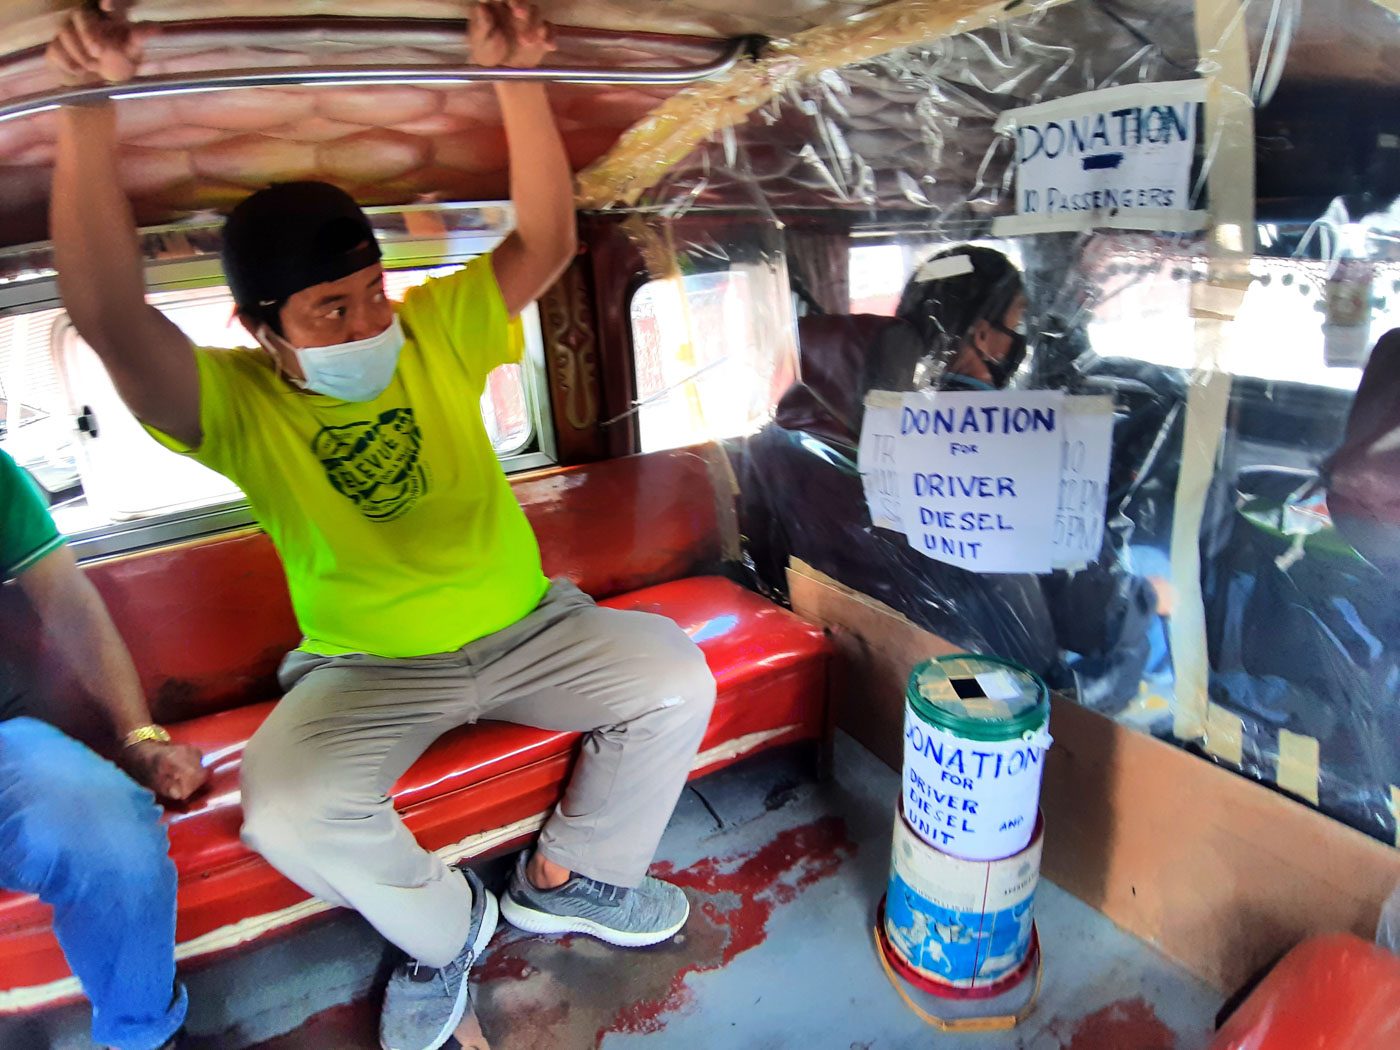 CHARITY. A jeepney driver of Trancoville, Baguio City placed a donation box inside his jeepney.  Photo by Mau Victa/Rappler 